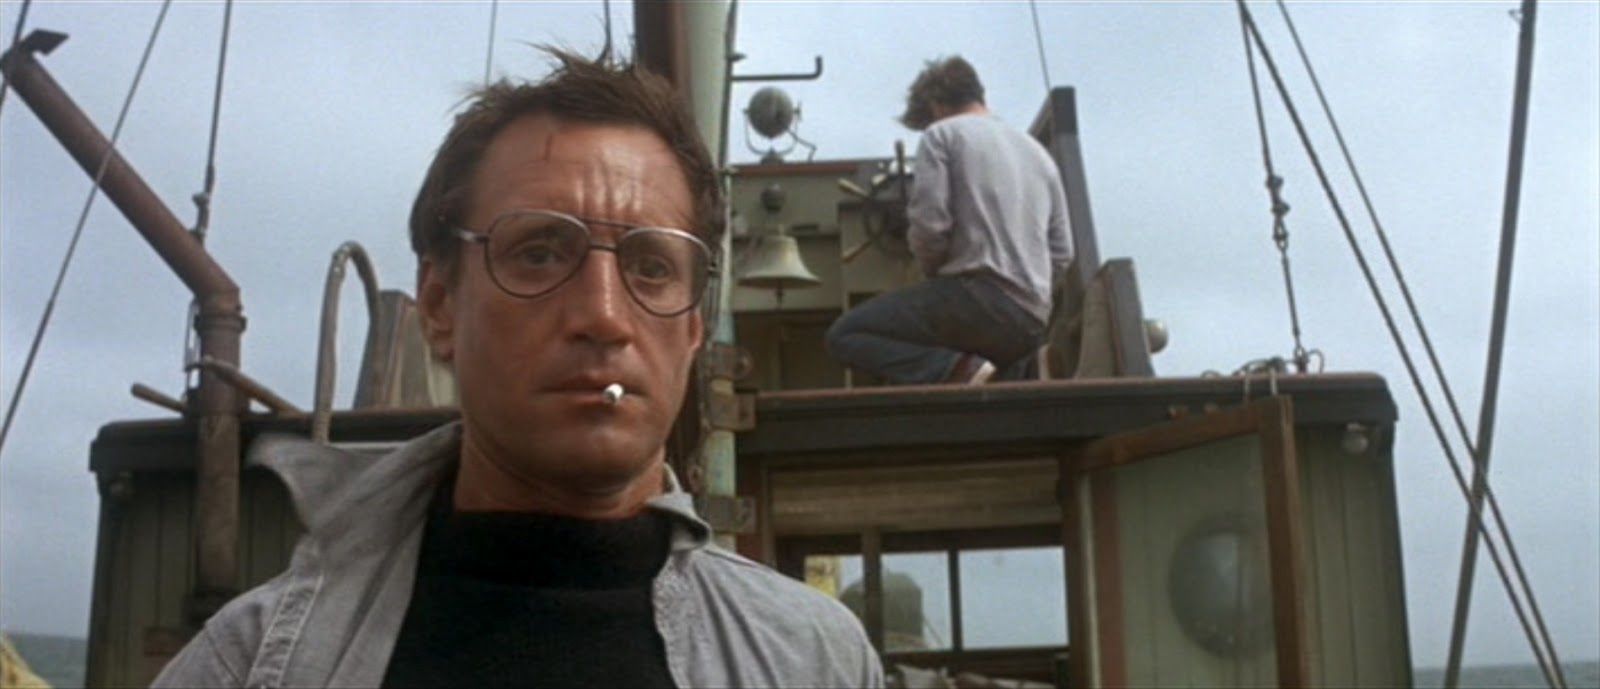 &quot;You&#039;re gonna need a bigger boat.&quot; - Jaws (1975)